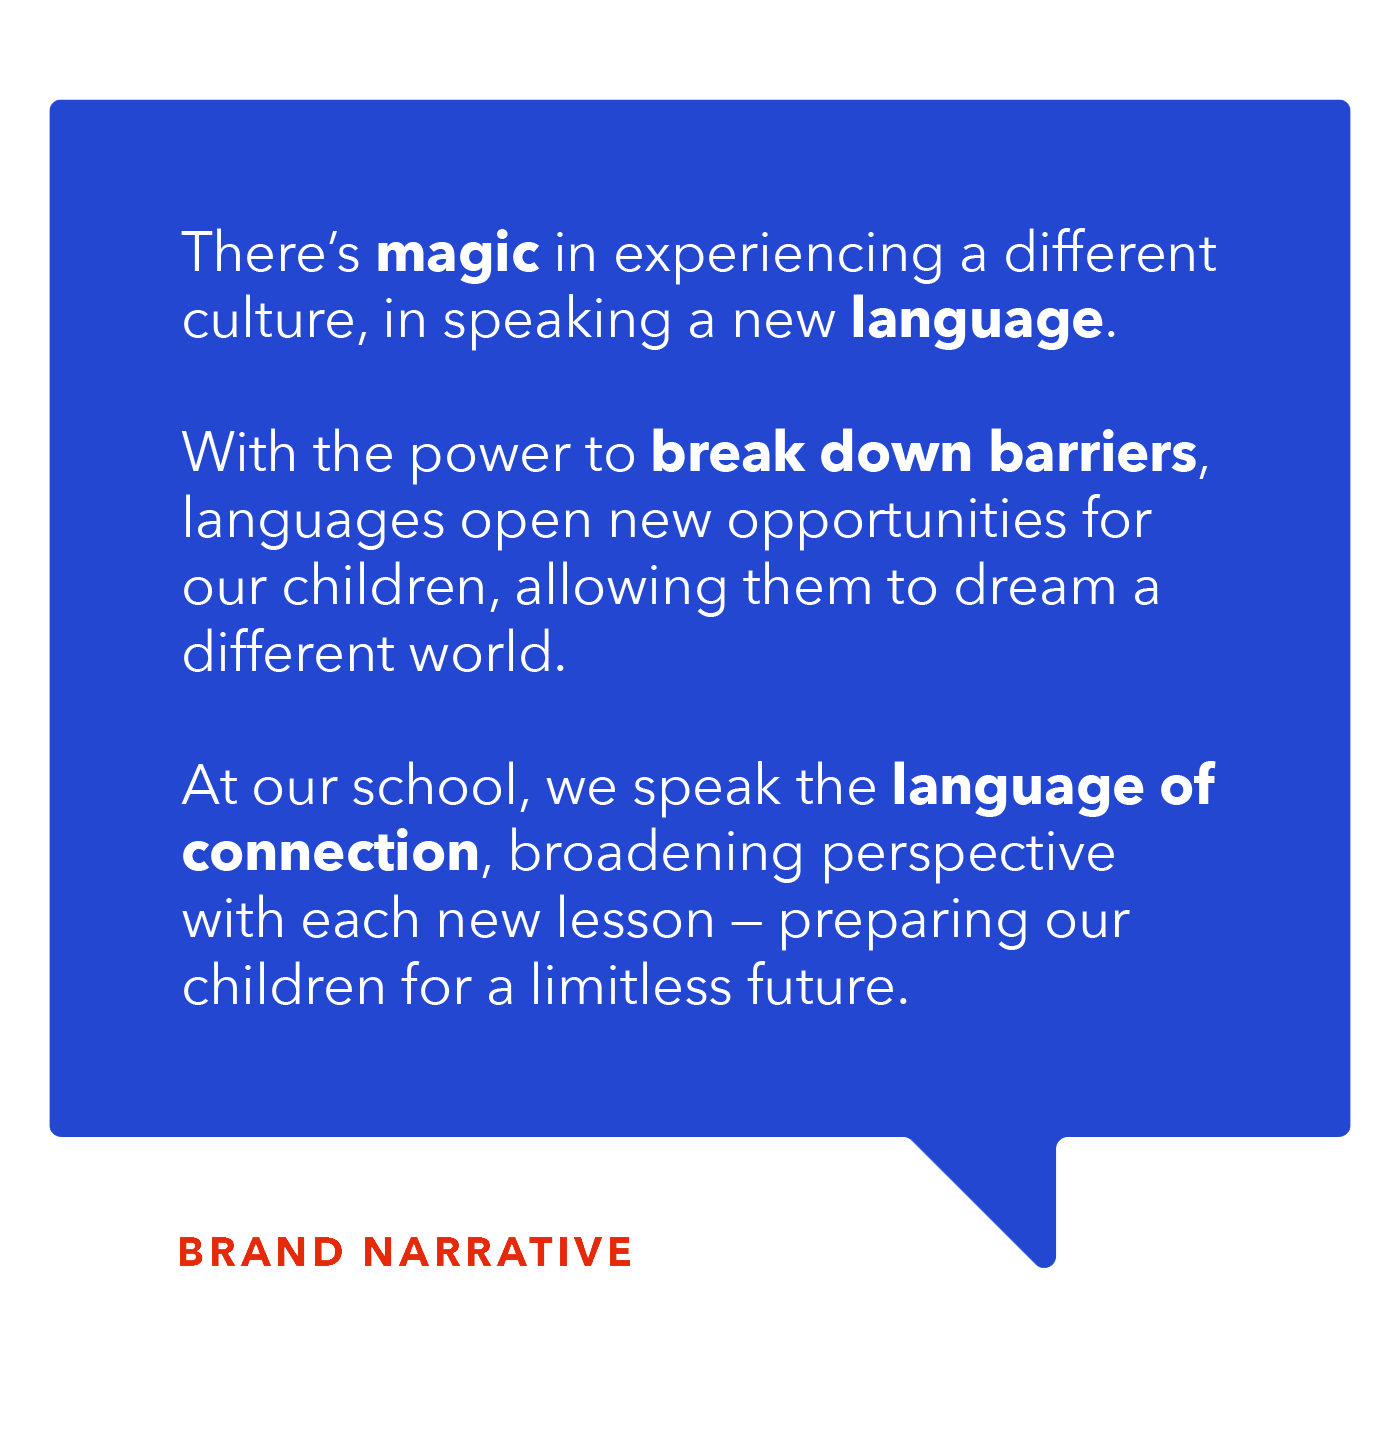 The SLLIS brand narrative: "There's magic in experience a different culture, in speaking a new language. With the power to break down barriers, languages open new opportunities for our children, allowing them to dream a different world. At our school, we speak the language of connection, broadening perspective with each new lesson—preparing our children for a limitless future."